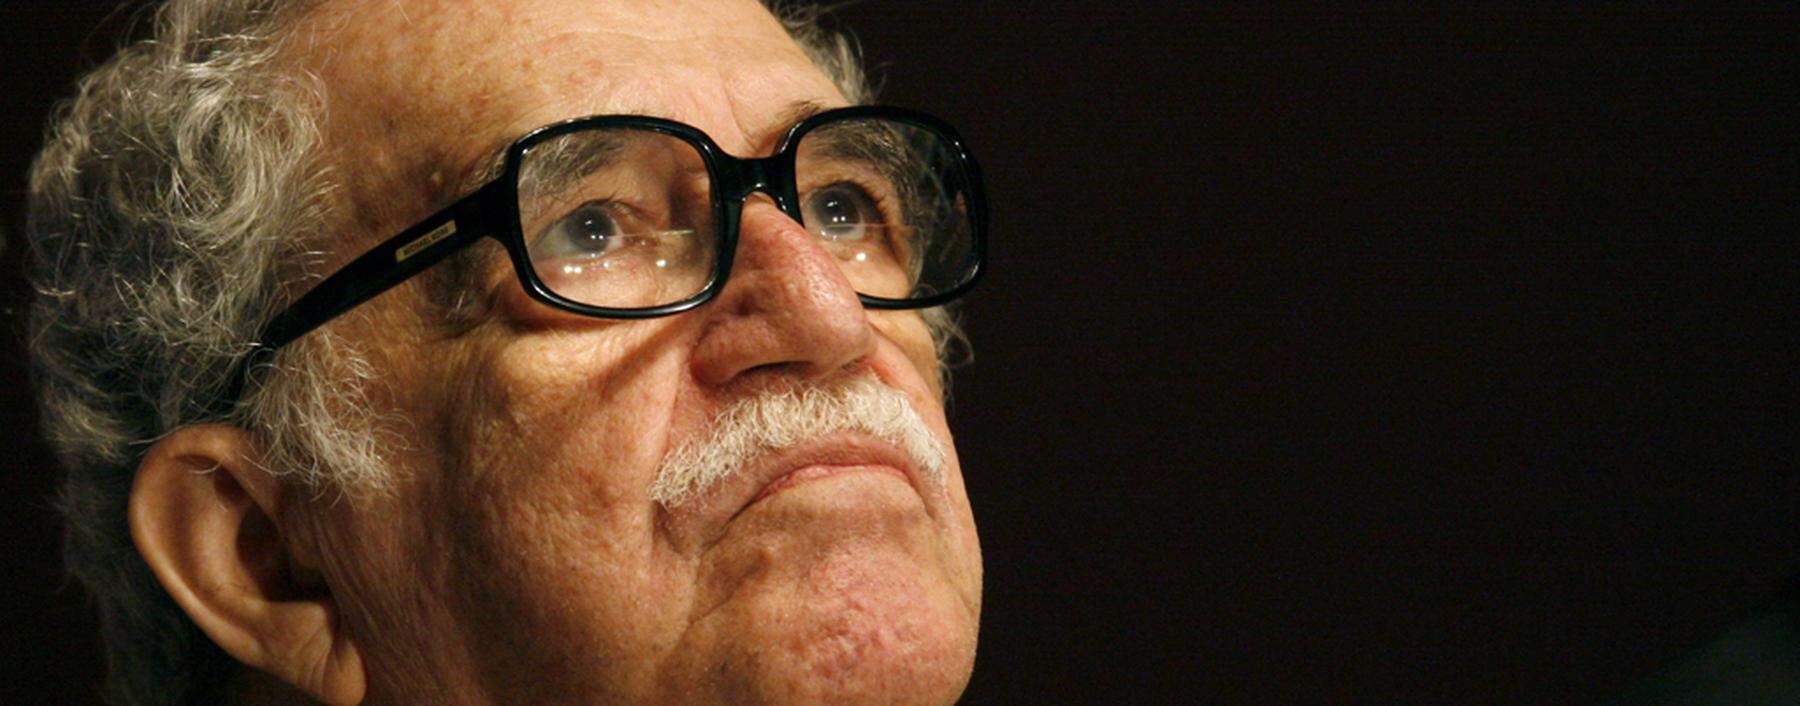 Colombian Nobel Prize laureate Gabriel Garcia Marquez listens to a speech during the New Journalism Prize awards ceremony at the Museum of Contemporary Art (MARCO) in Monterrey